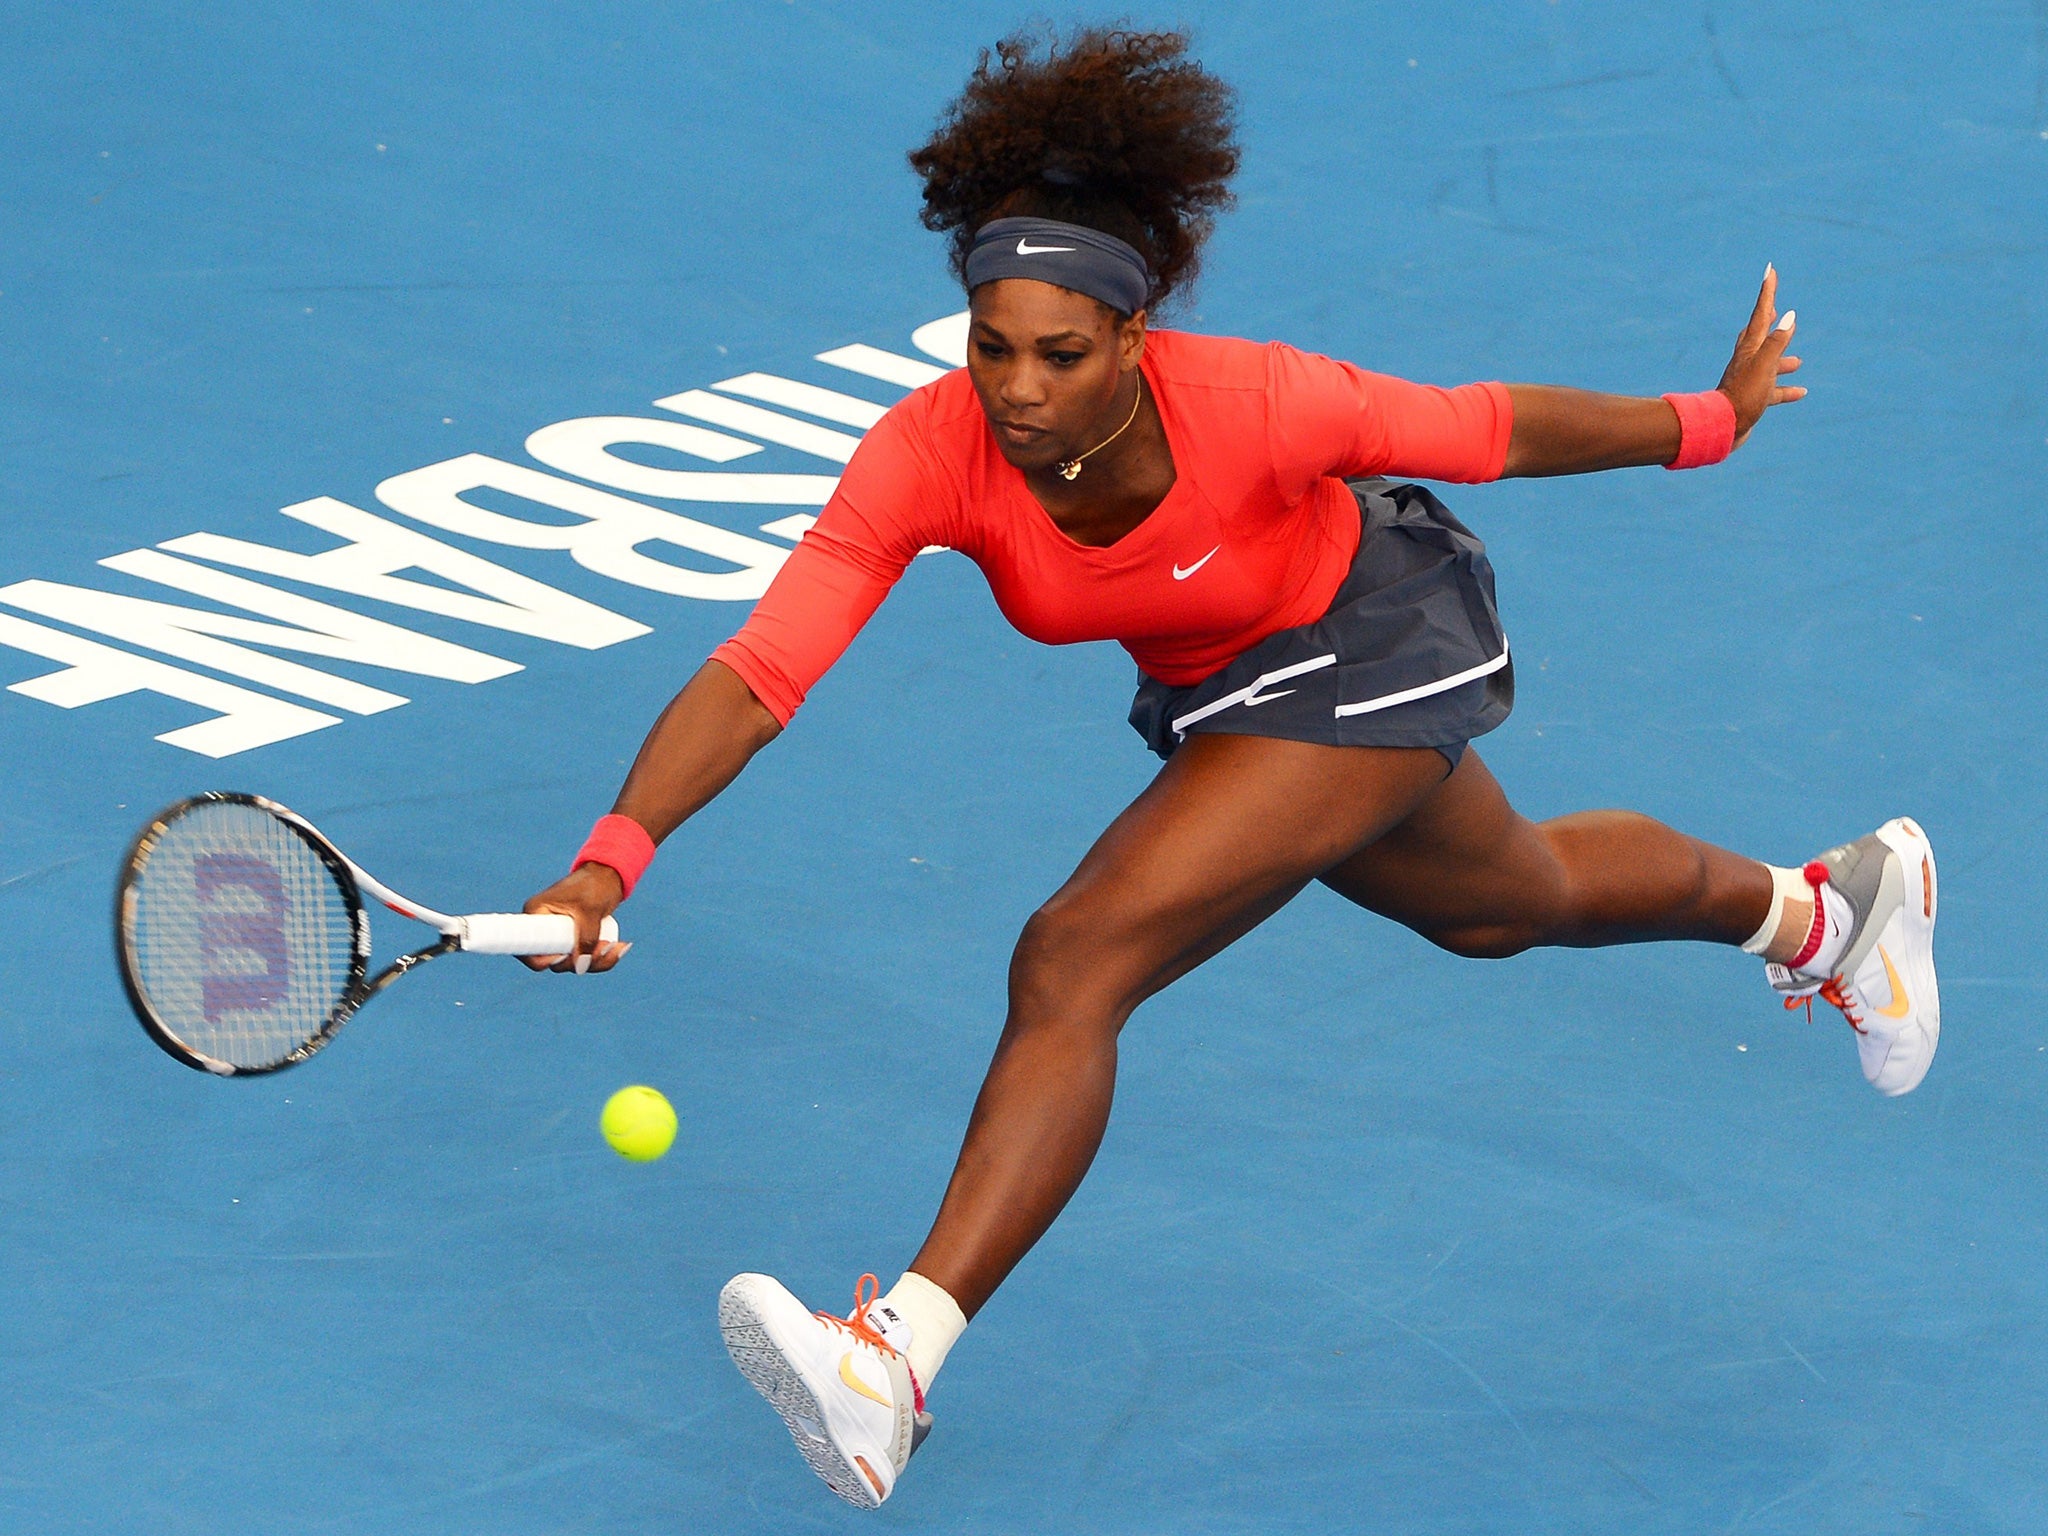 Serena Williams stretches to make a return during her first-round win in Brisbane